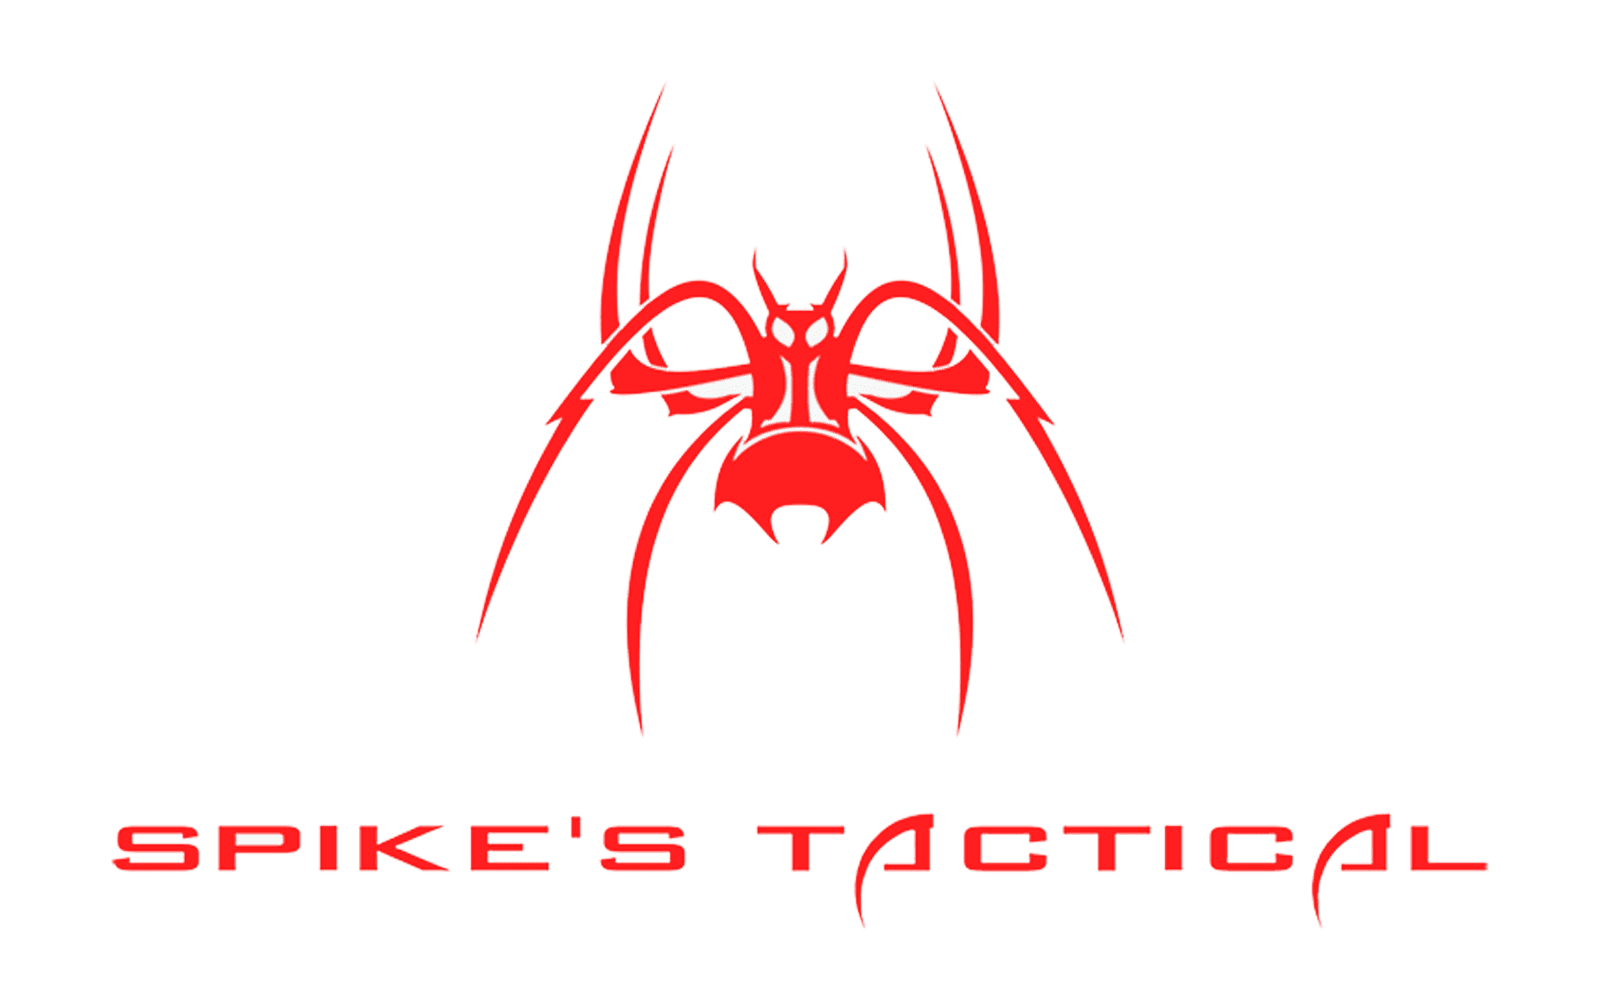 spikes tactical zombie logo